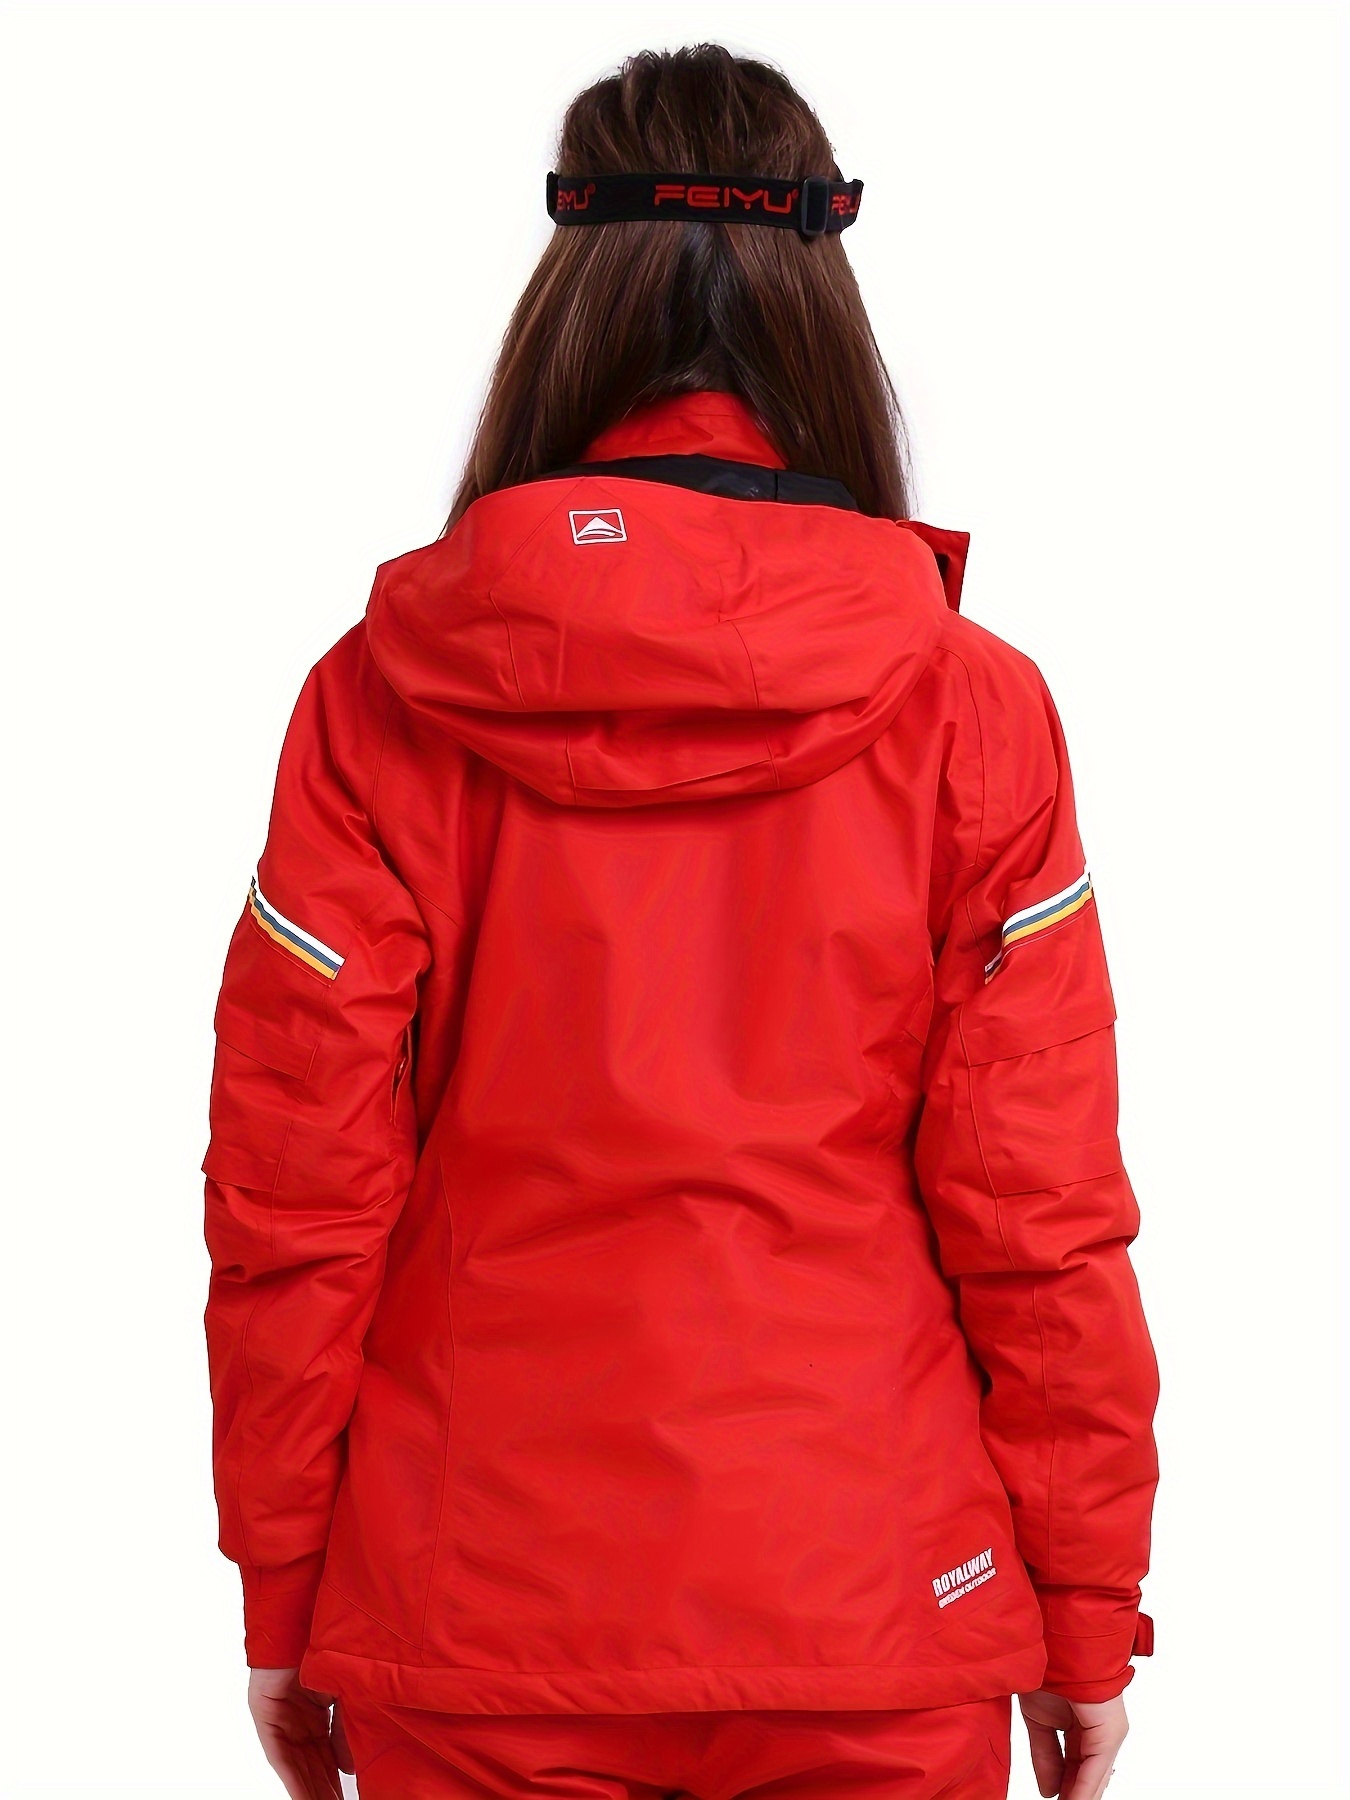 Majestic Thermal Athletic Jackets for Women